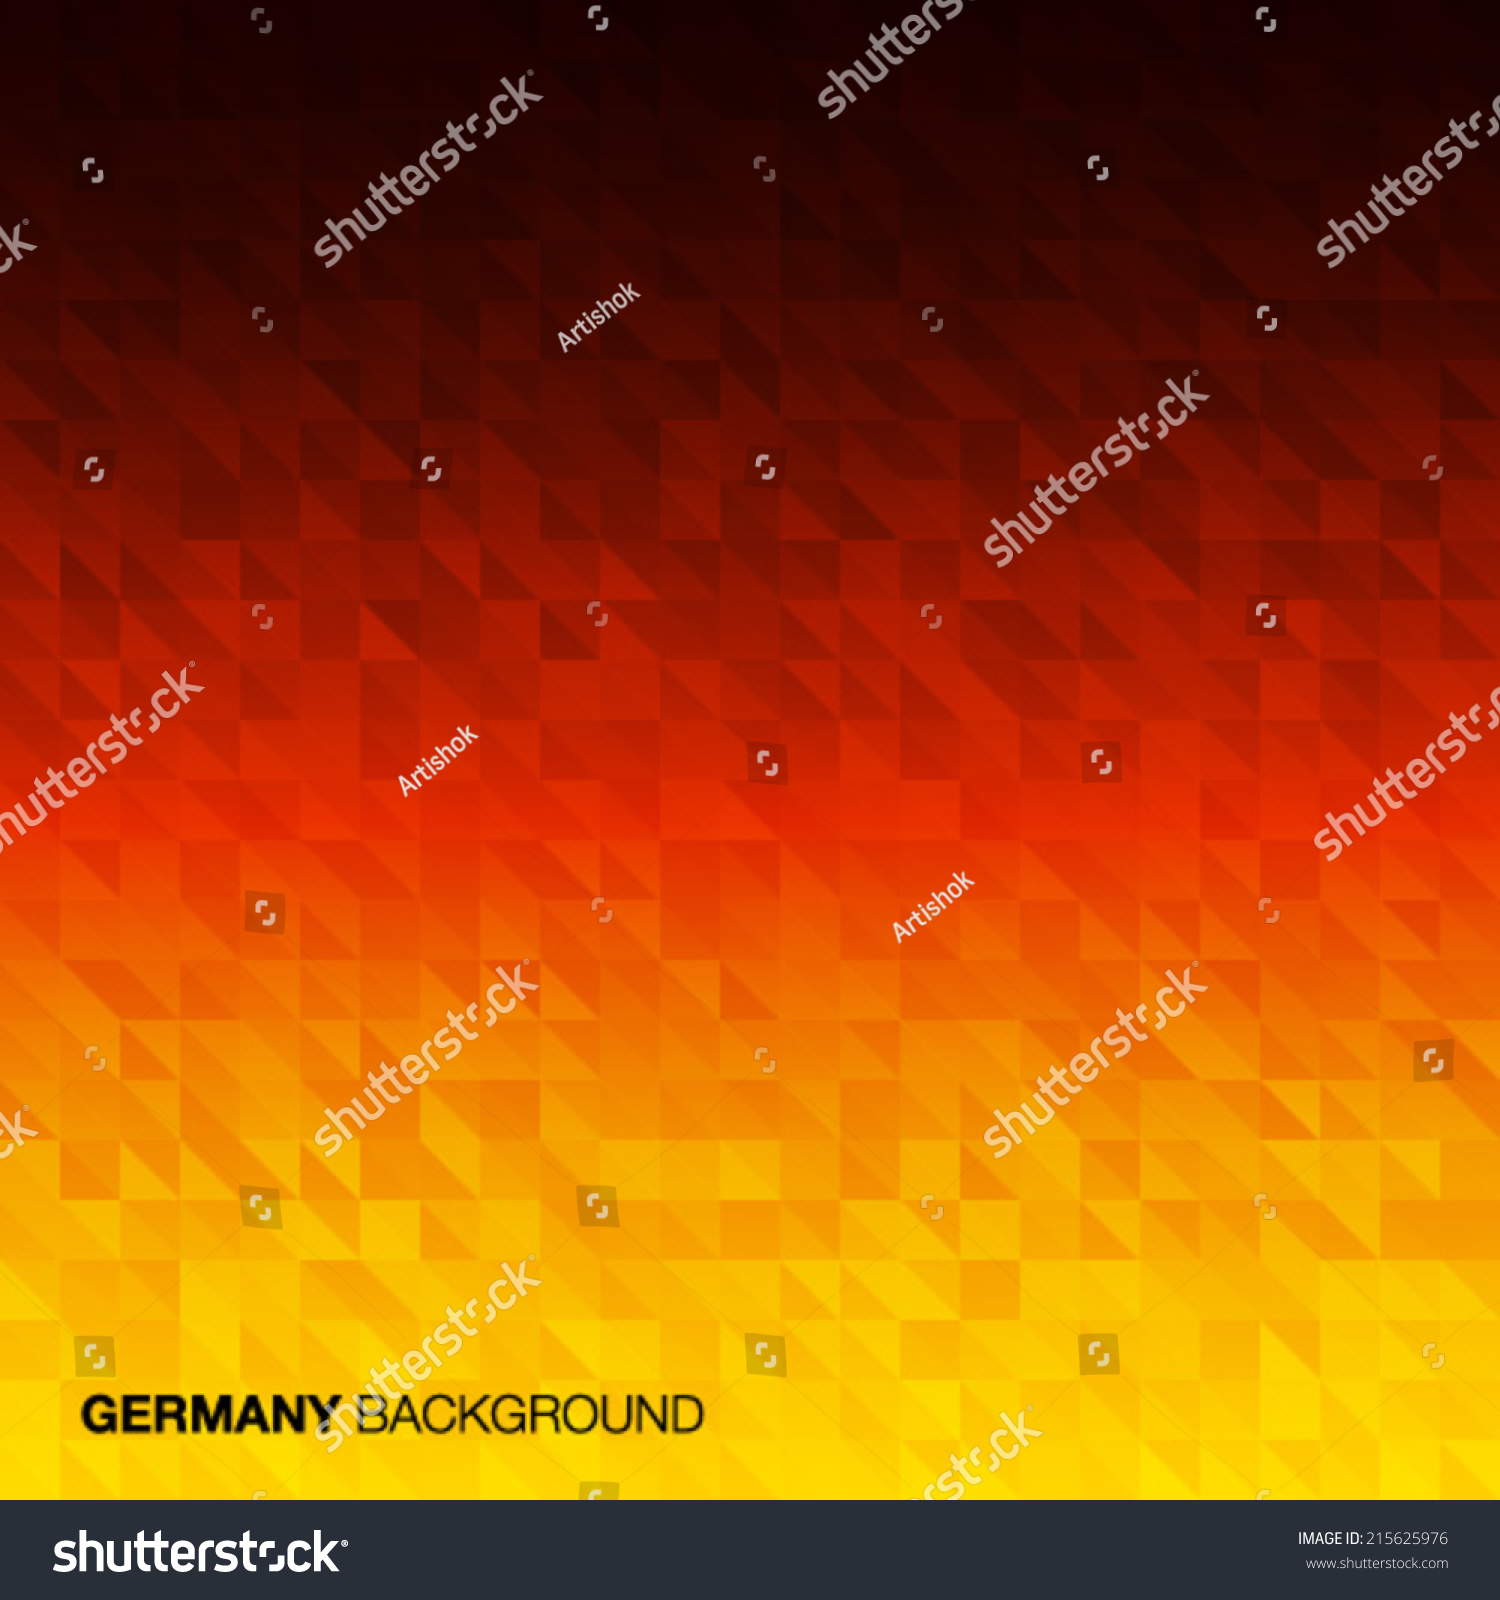 Abstract Background using Germany flag colors, vector illustration  #215625976